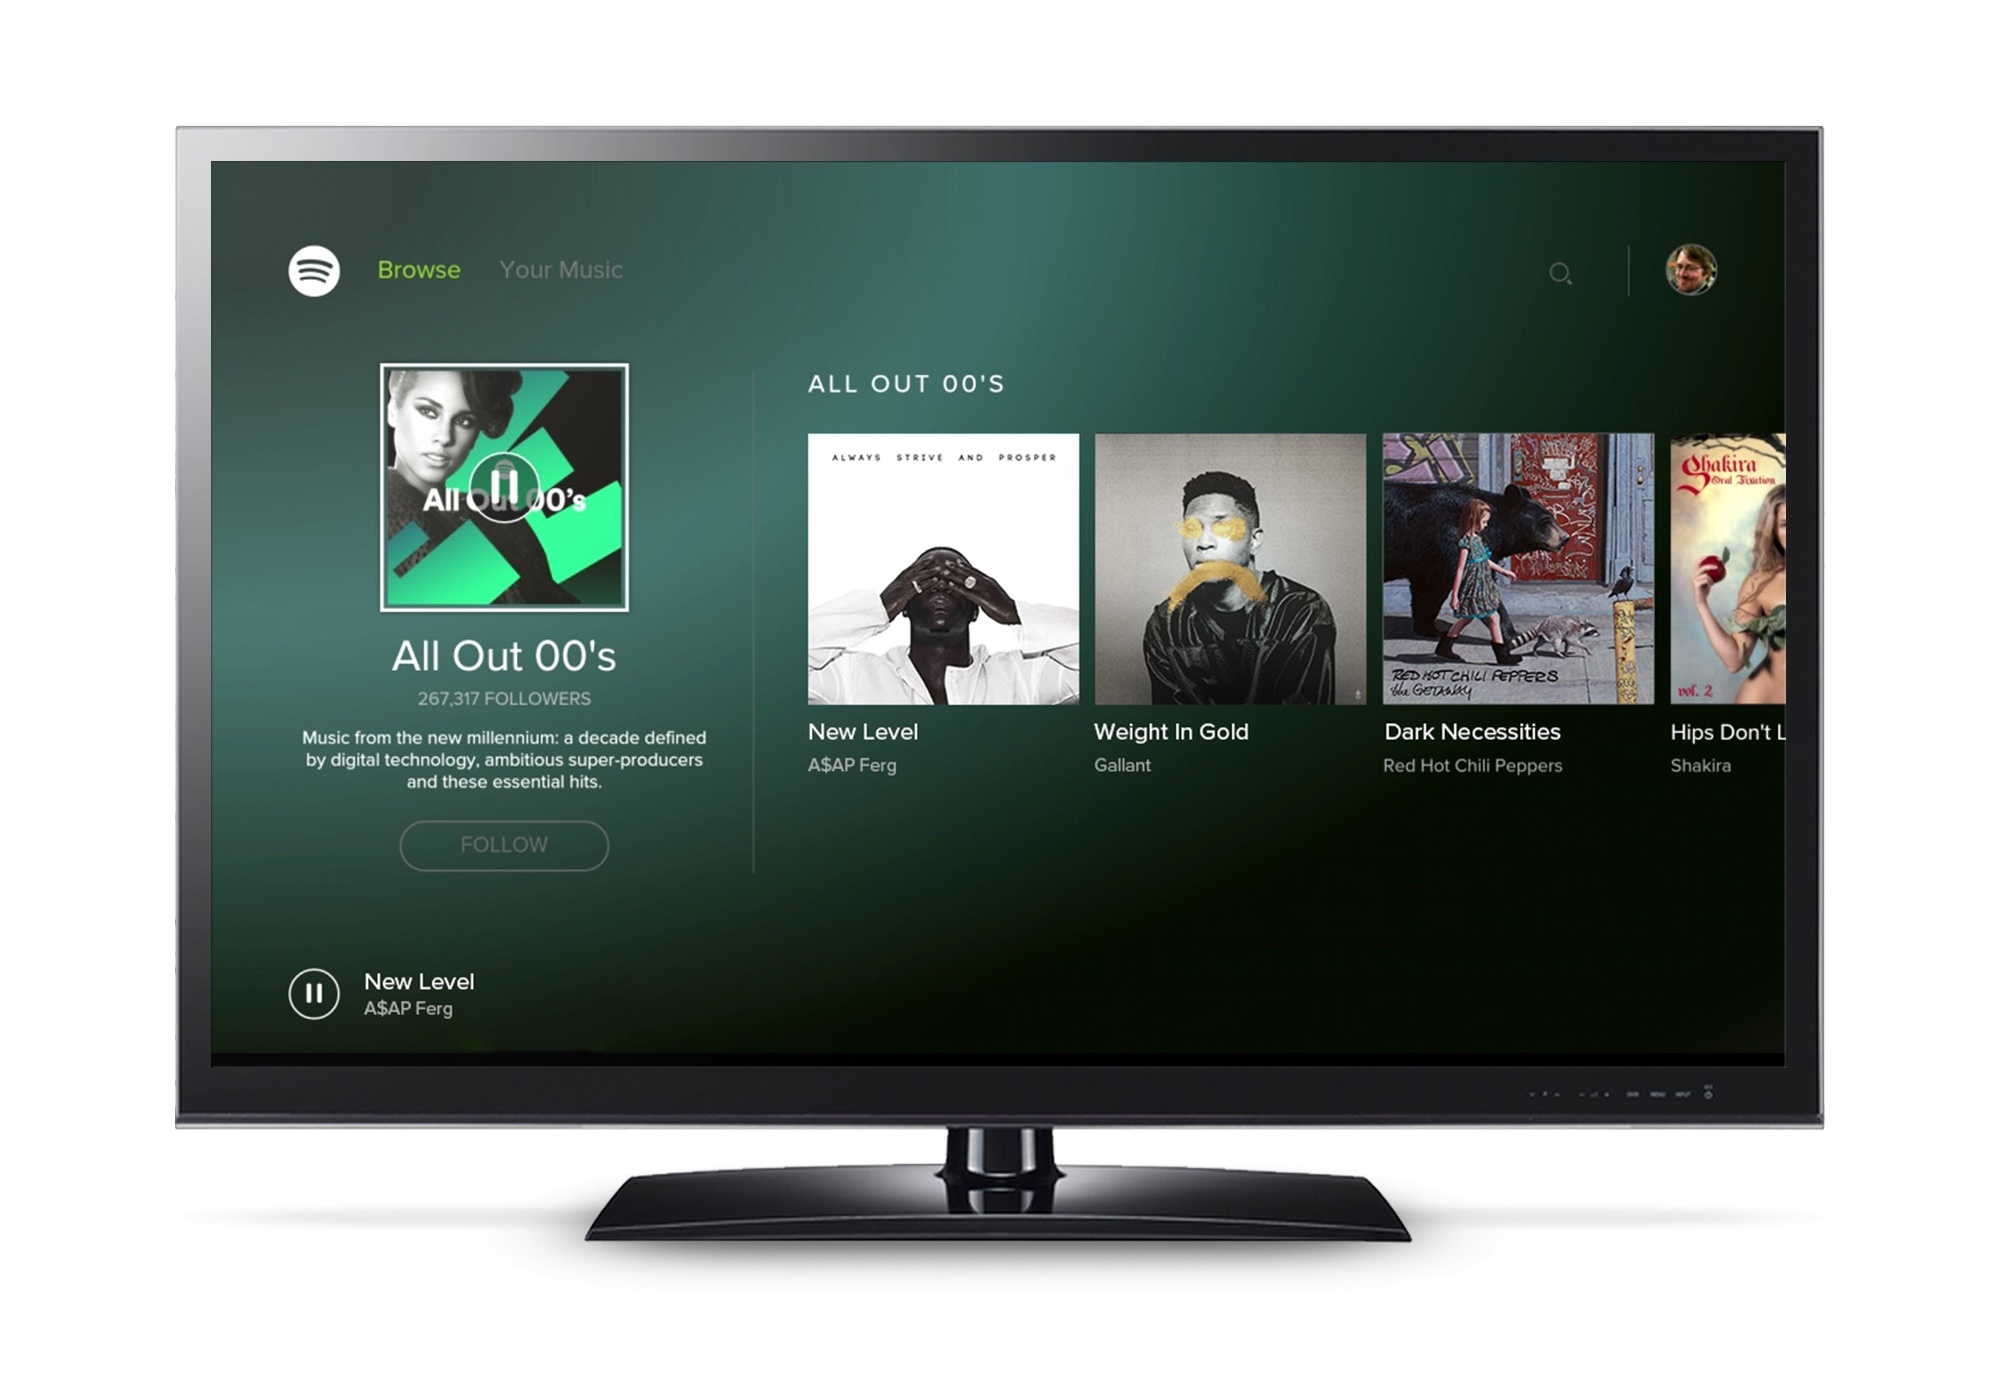 You can finally stream free music on Smart TV’s with Spotify!